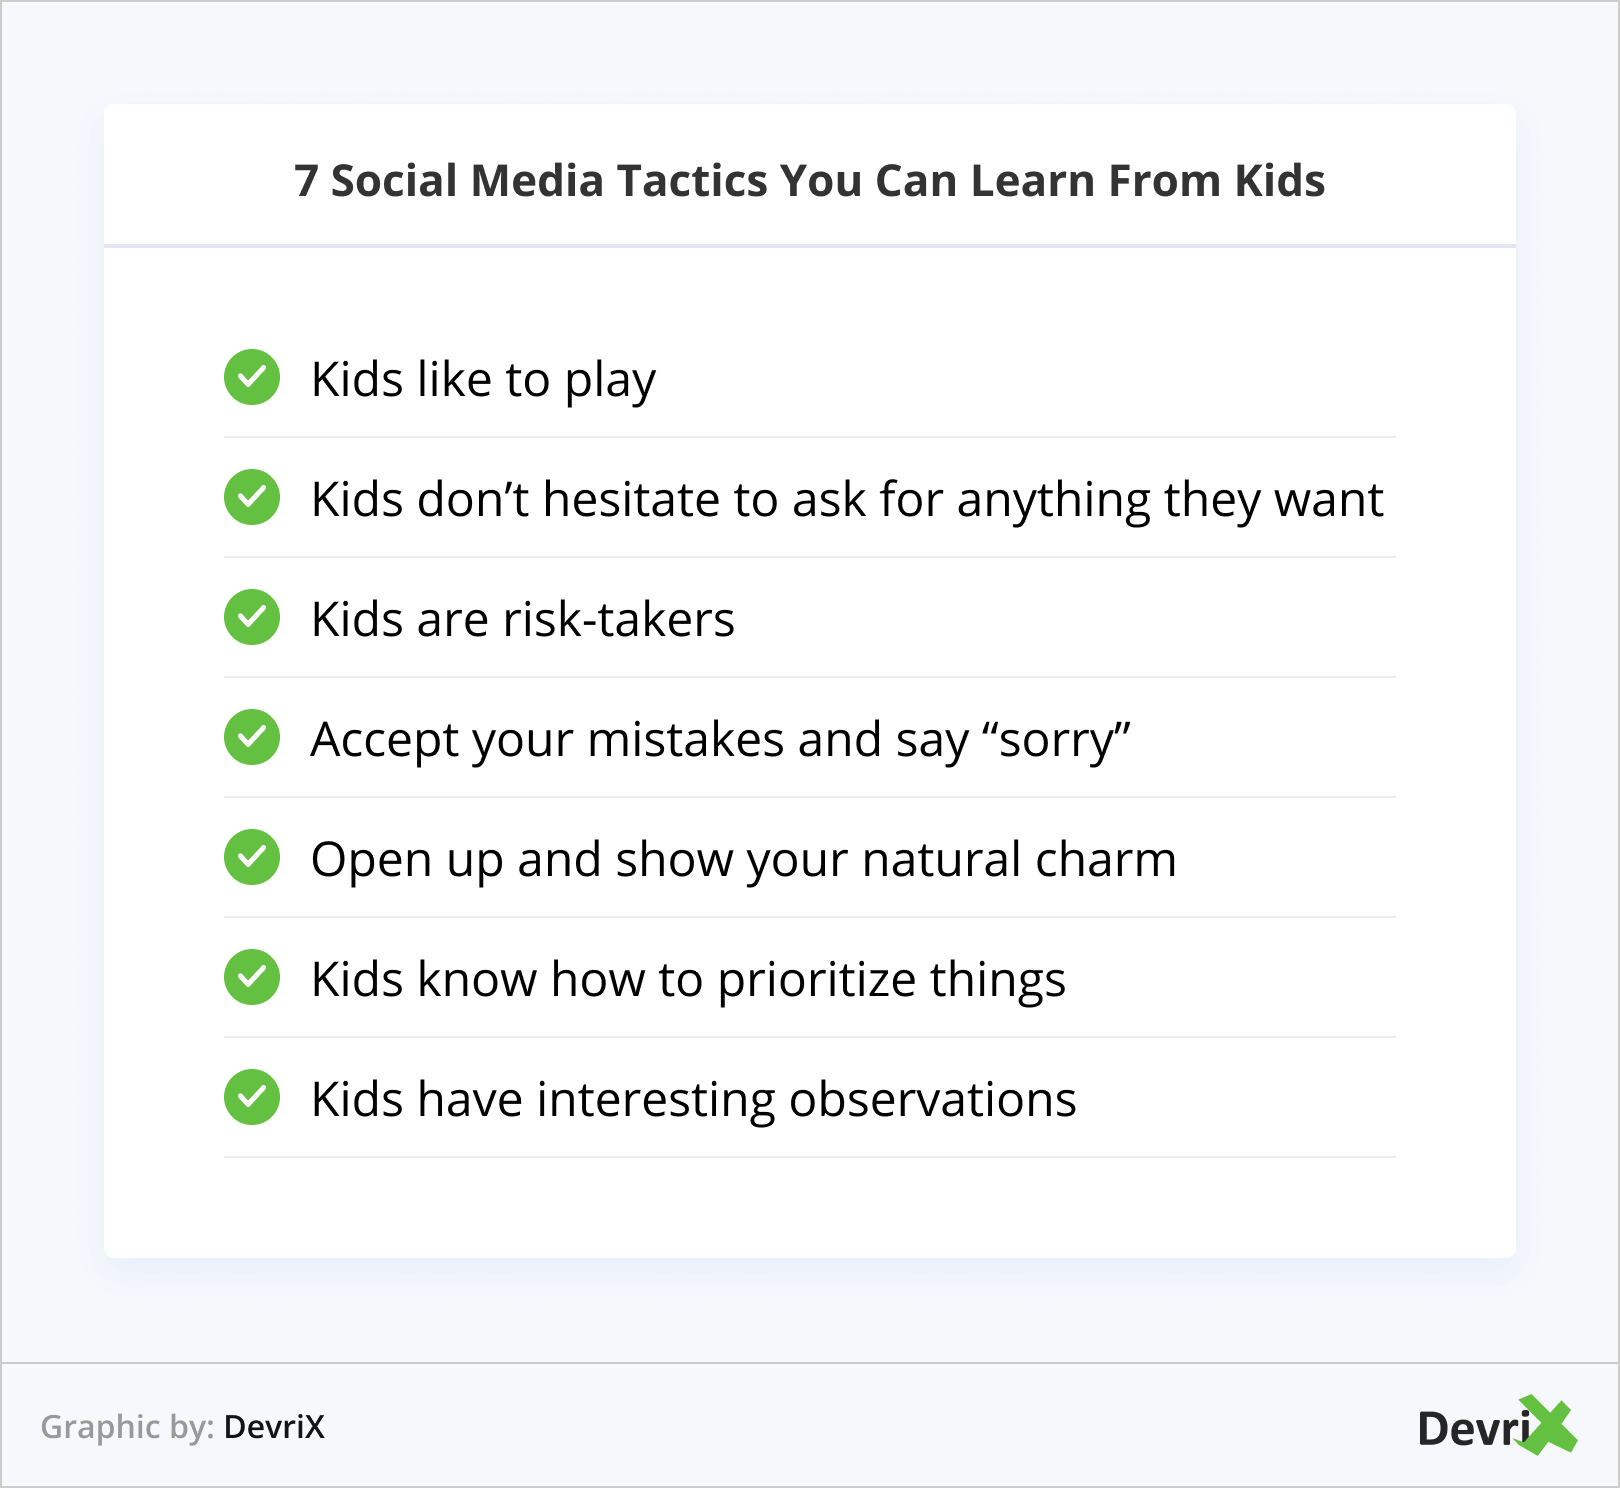 7 Social Media Tactics You Can Learn From Kids